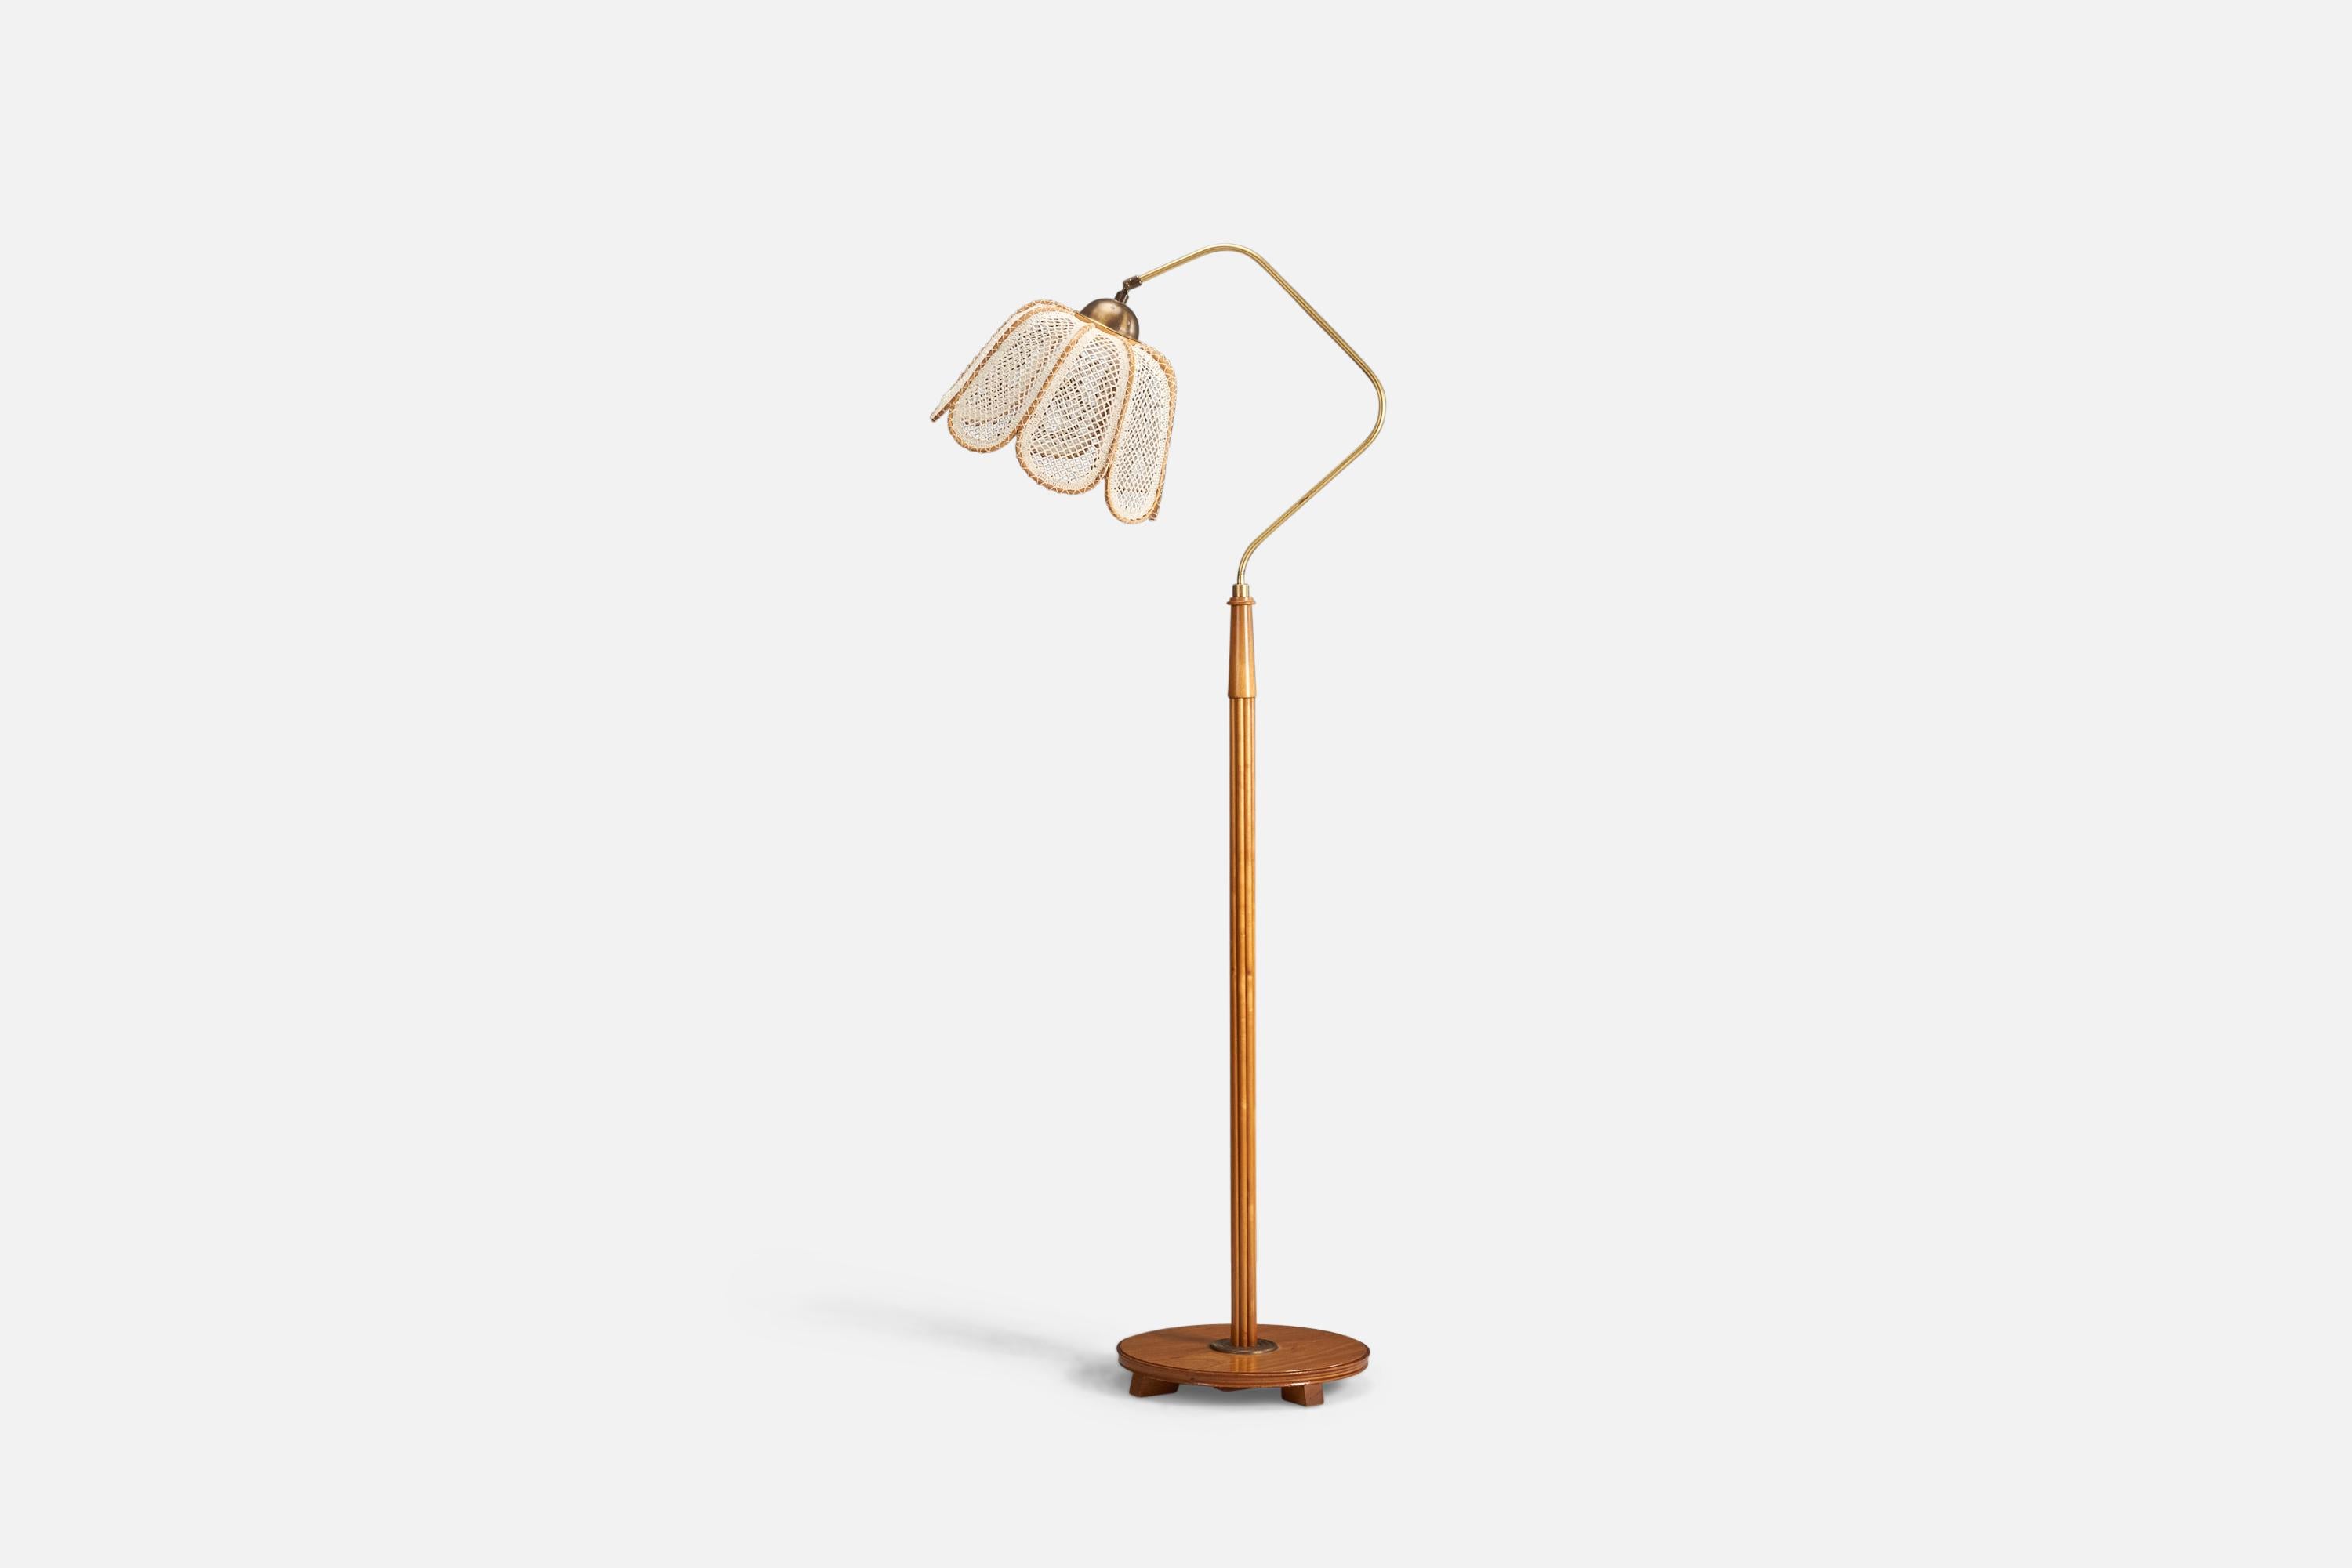 An elm, brass and embroidery fabric floor lamp designed and produced by a Swedish Designer, Sweden, 1930s.

Socket takes standard E-26 medium base bulb.

There is no maximum wattage stated on the fixture.